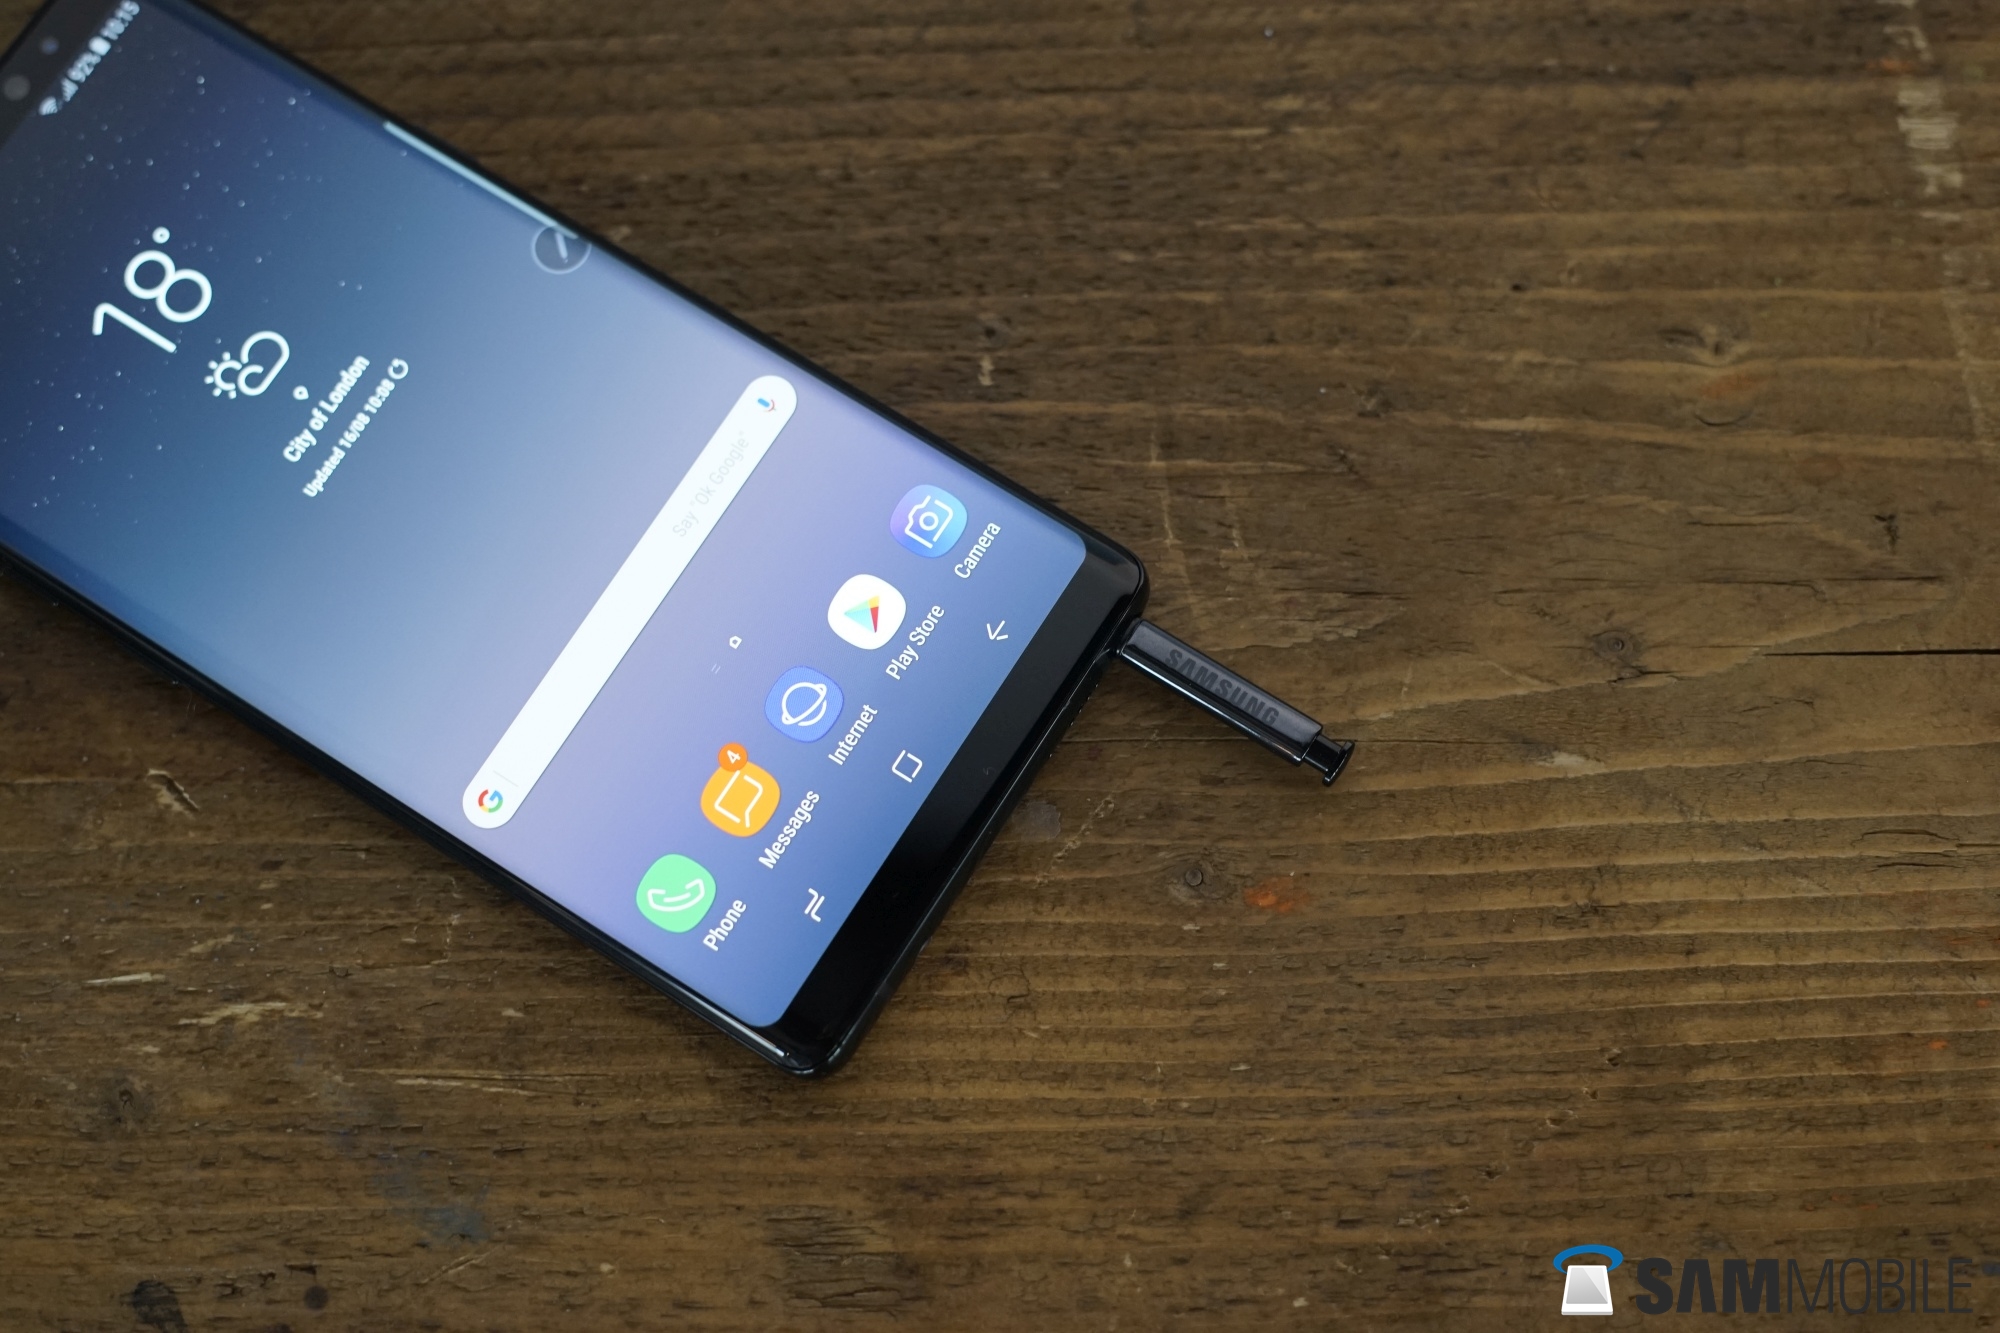 Galaxy Note 8 user manual in English available now - SamMobile - SamMobile